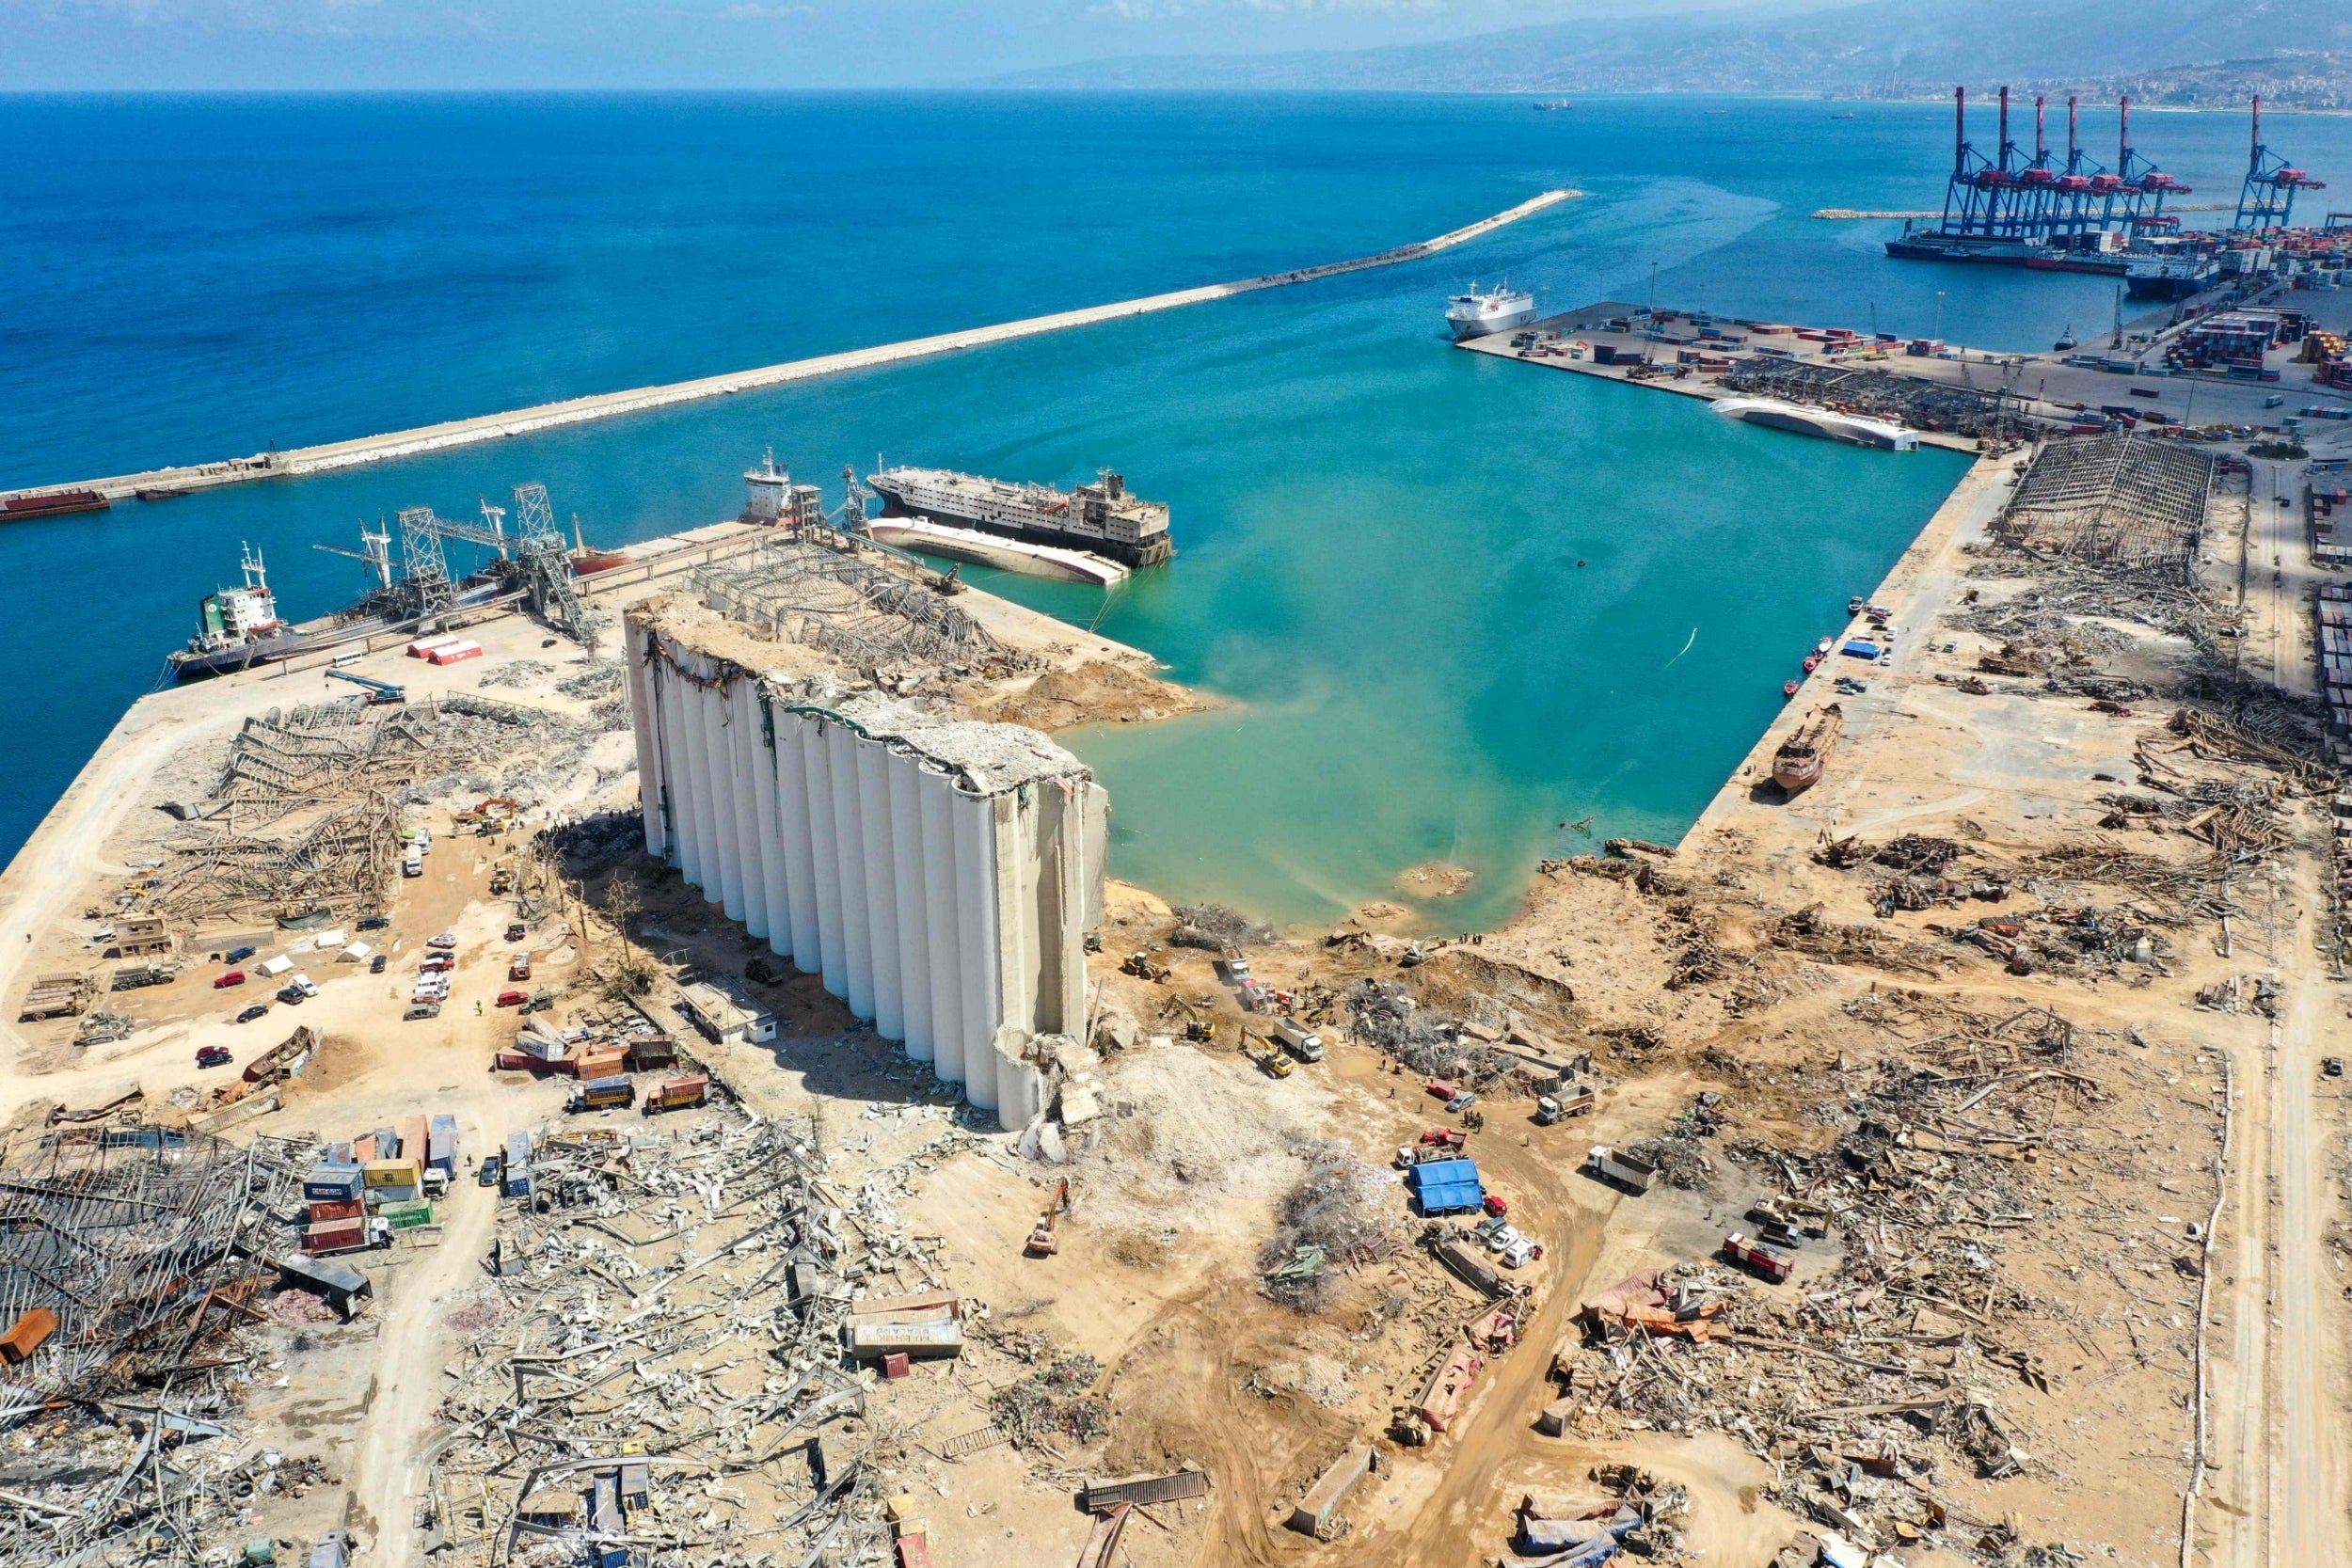 A general view of the port of Beirut